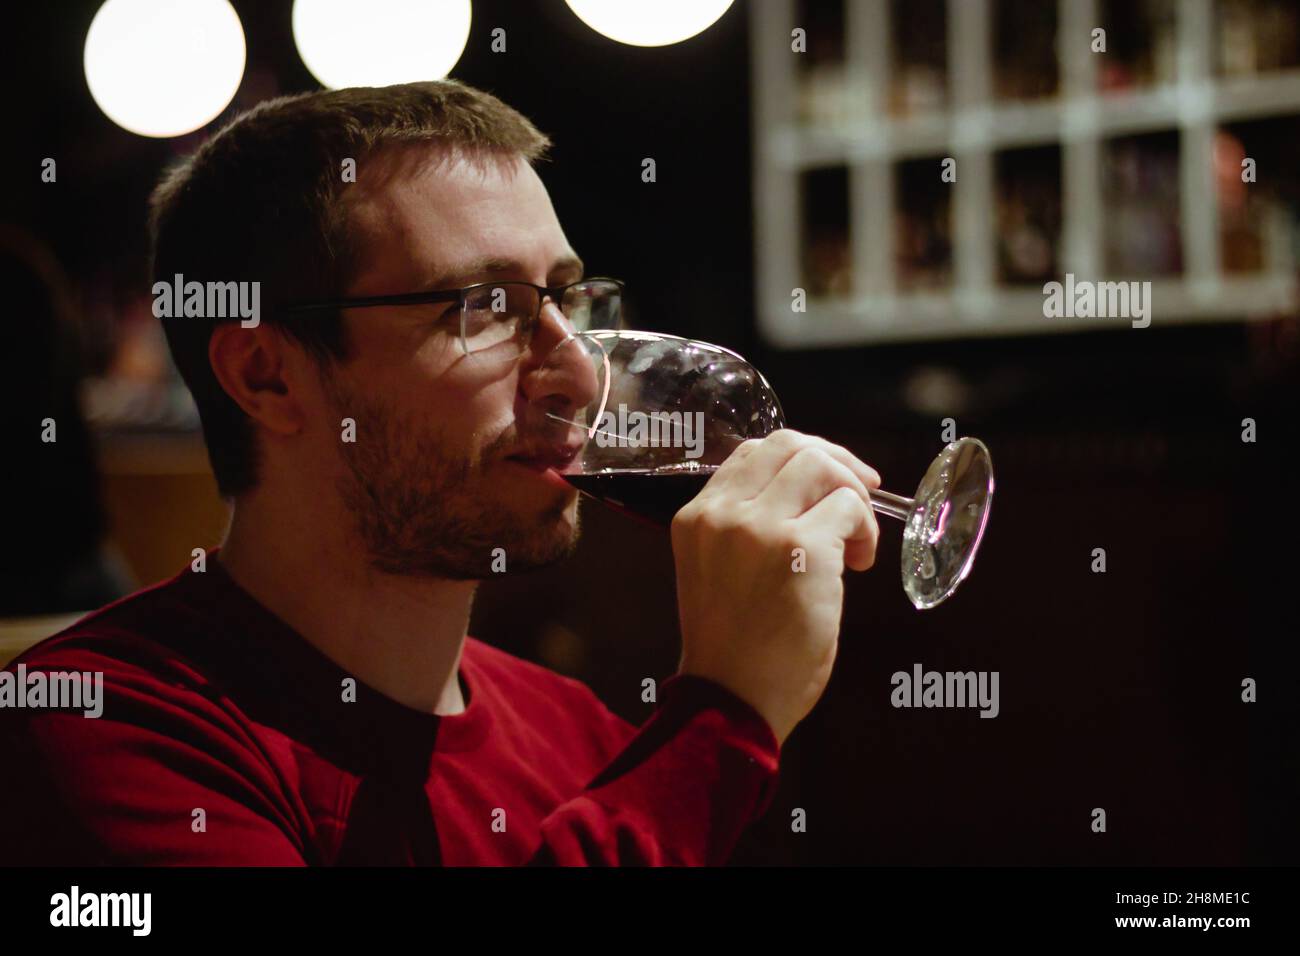 Young man in a restaurant drinking red wine from a glass Stock Photo